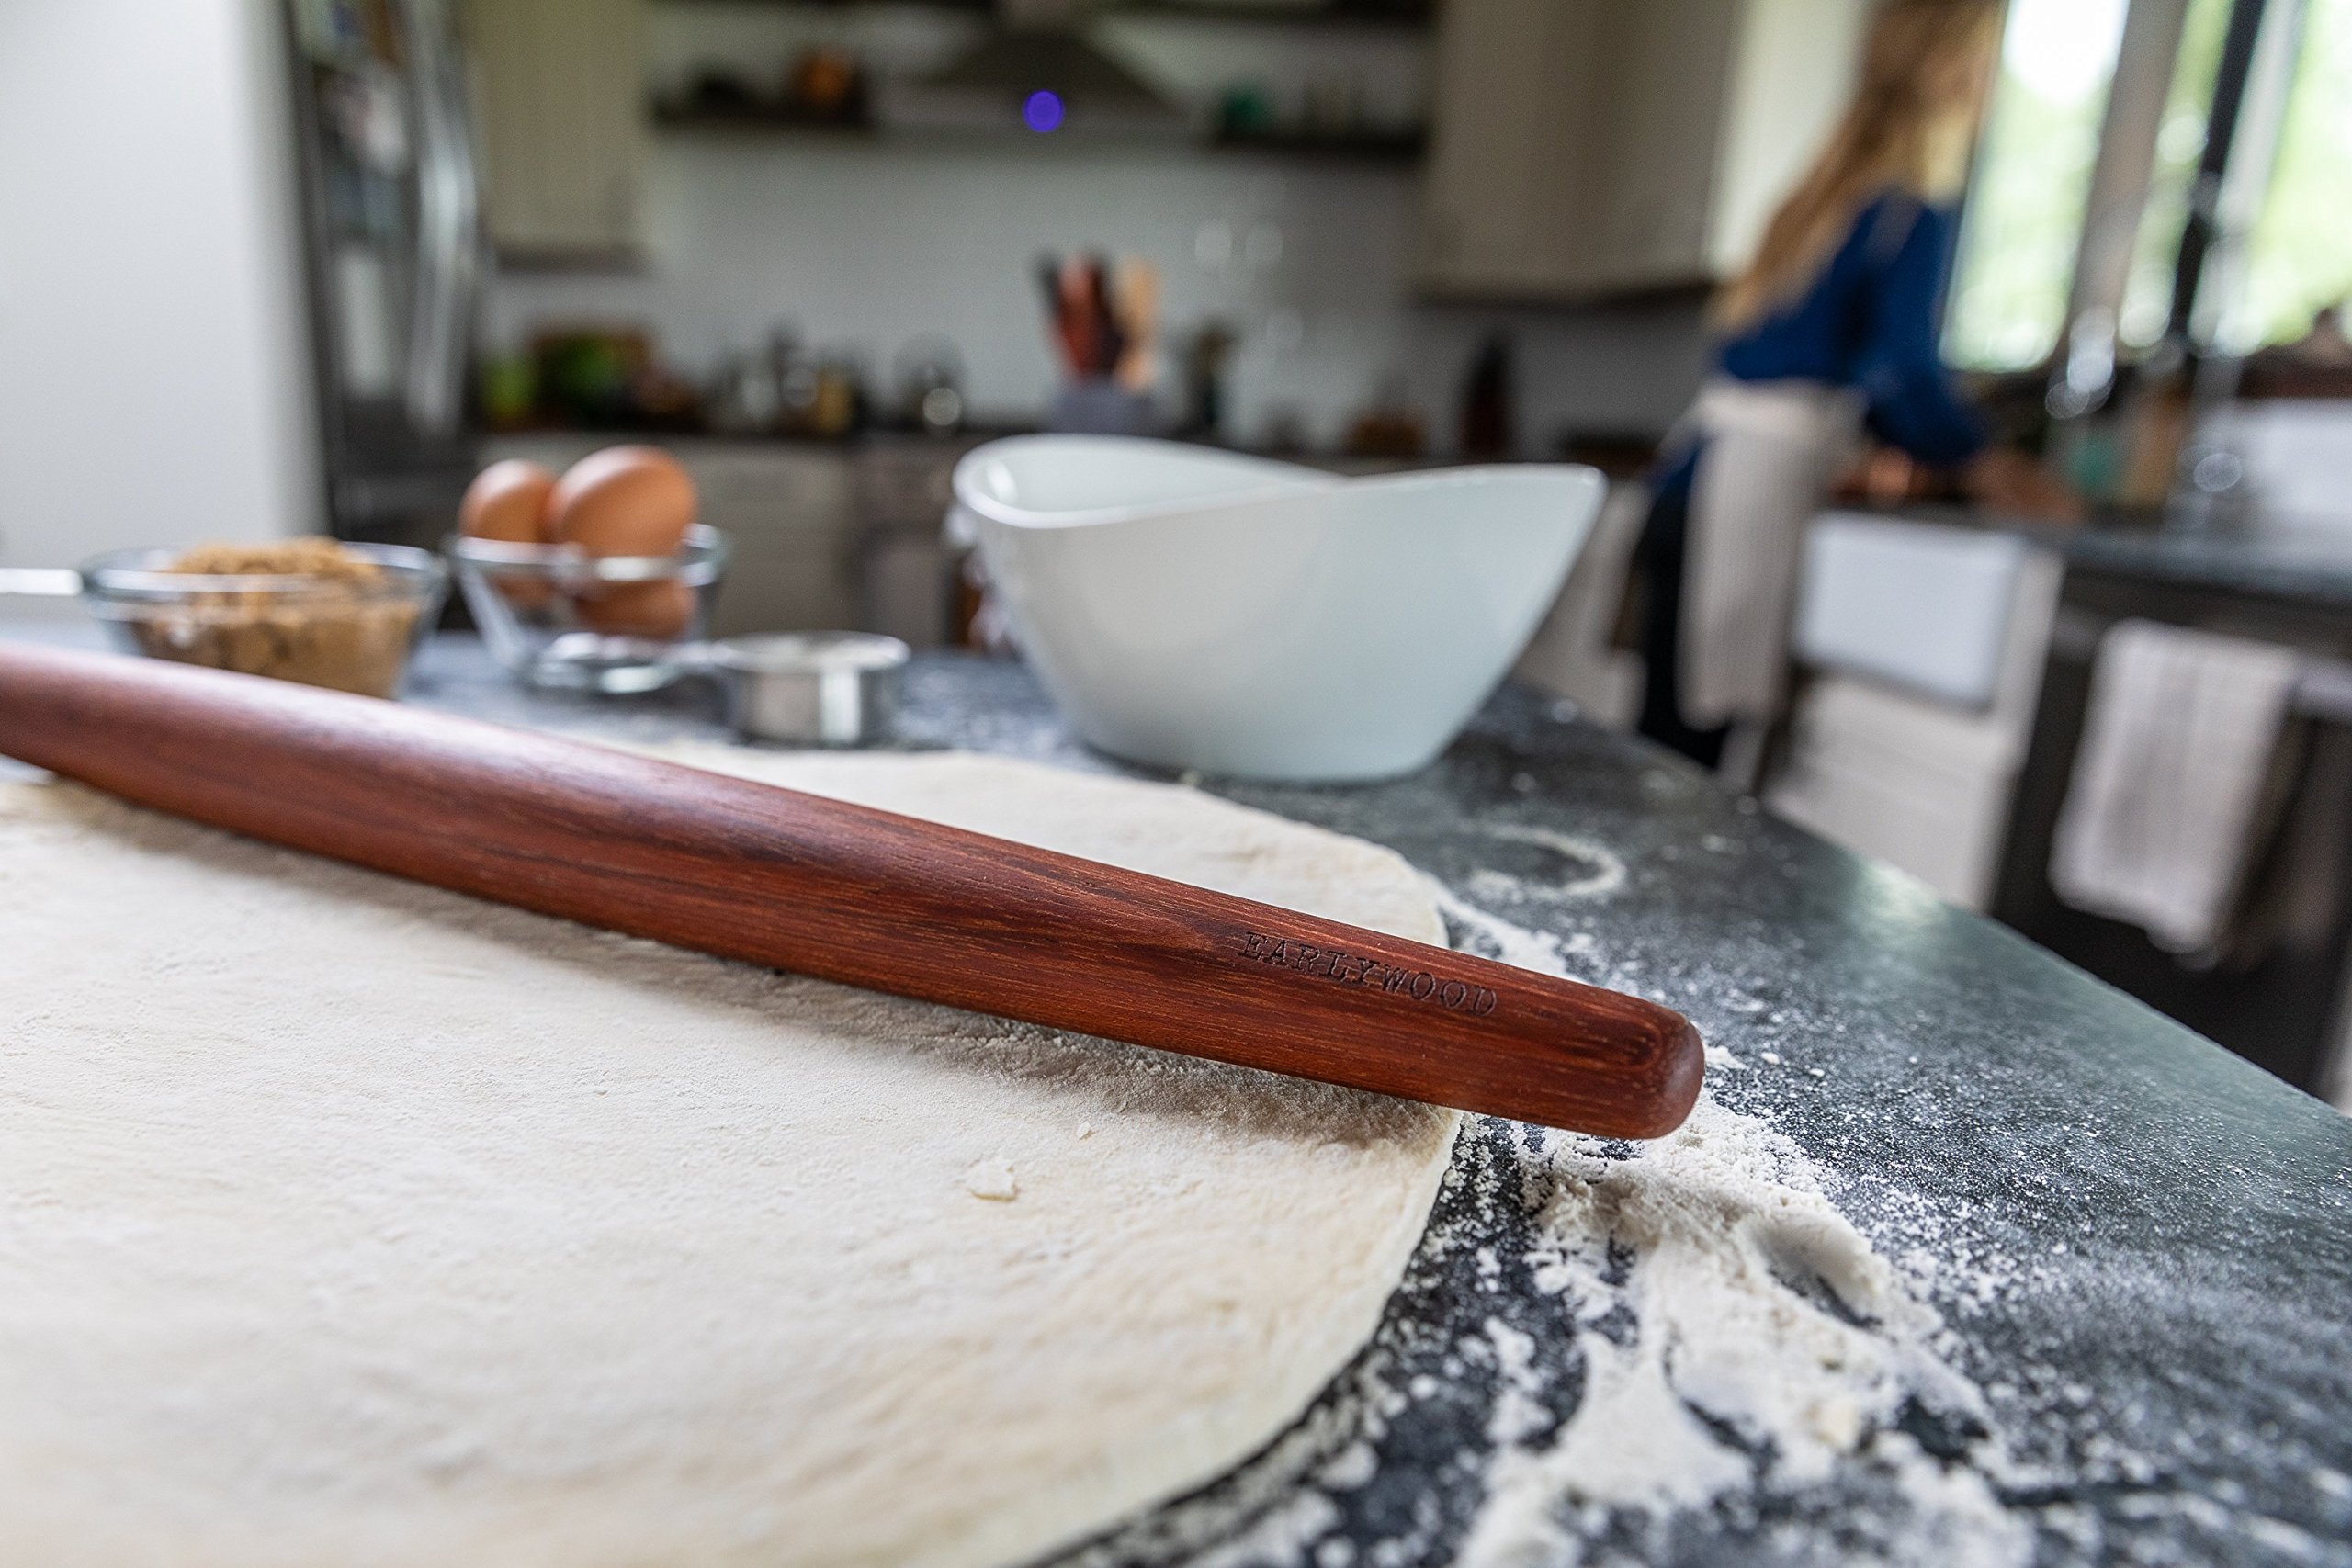 Earlywood French Rolling Pin - Tapered Wooden Rolling Pin for Baking Pizza, Pastry Dough or Pasta - Hard Wood Roller Baking Pin Made in USA, By Earlywood -Jatoba, Maple, Mexican Ebony,Multicolor